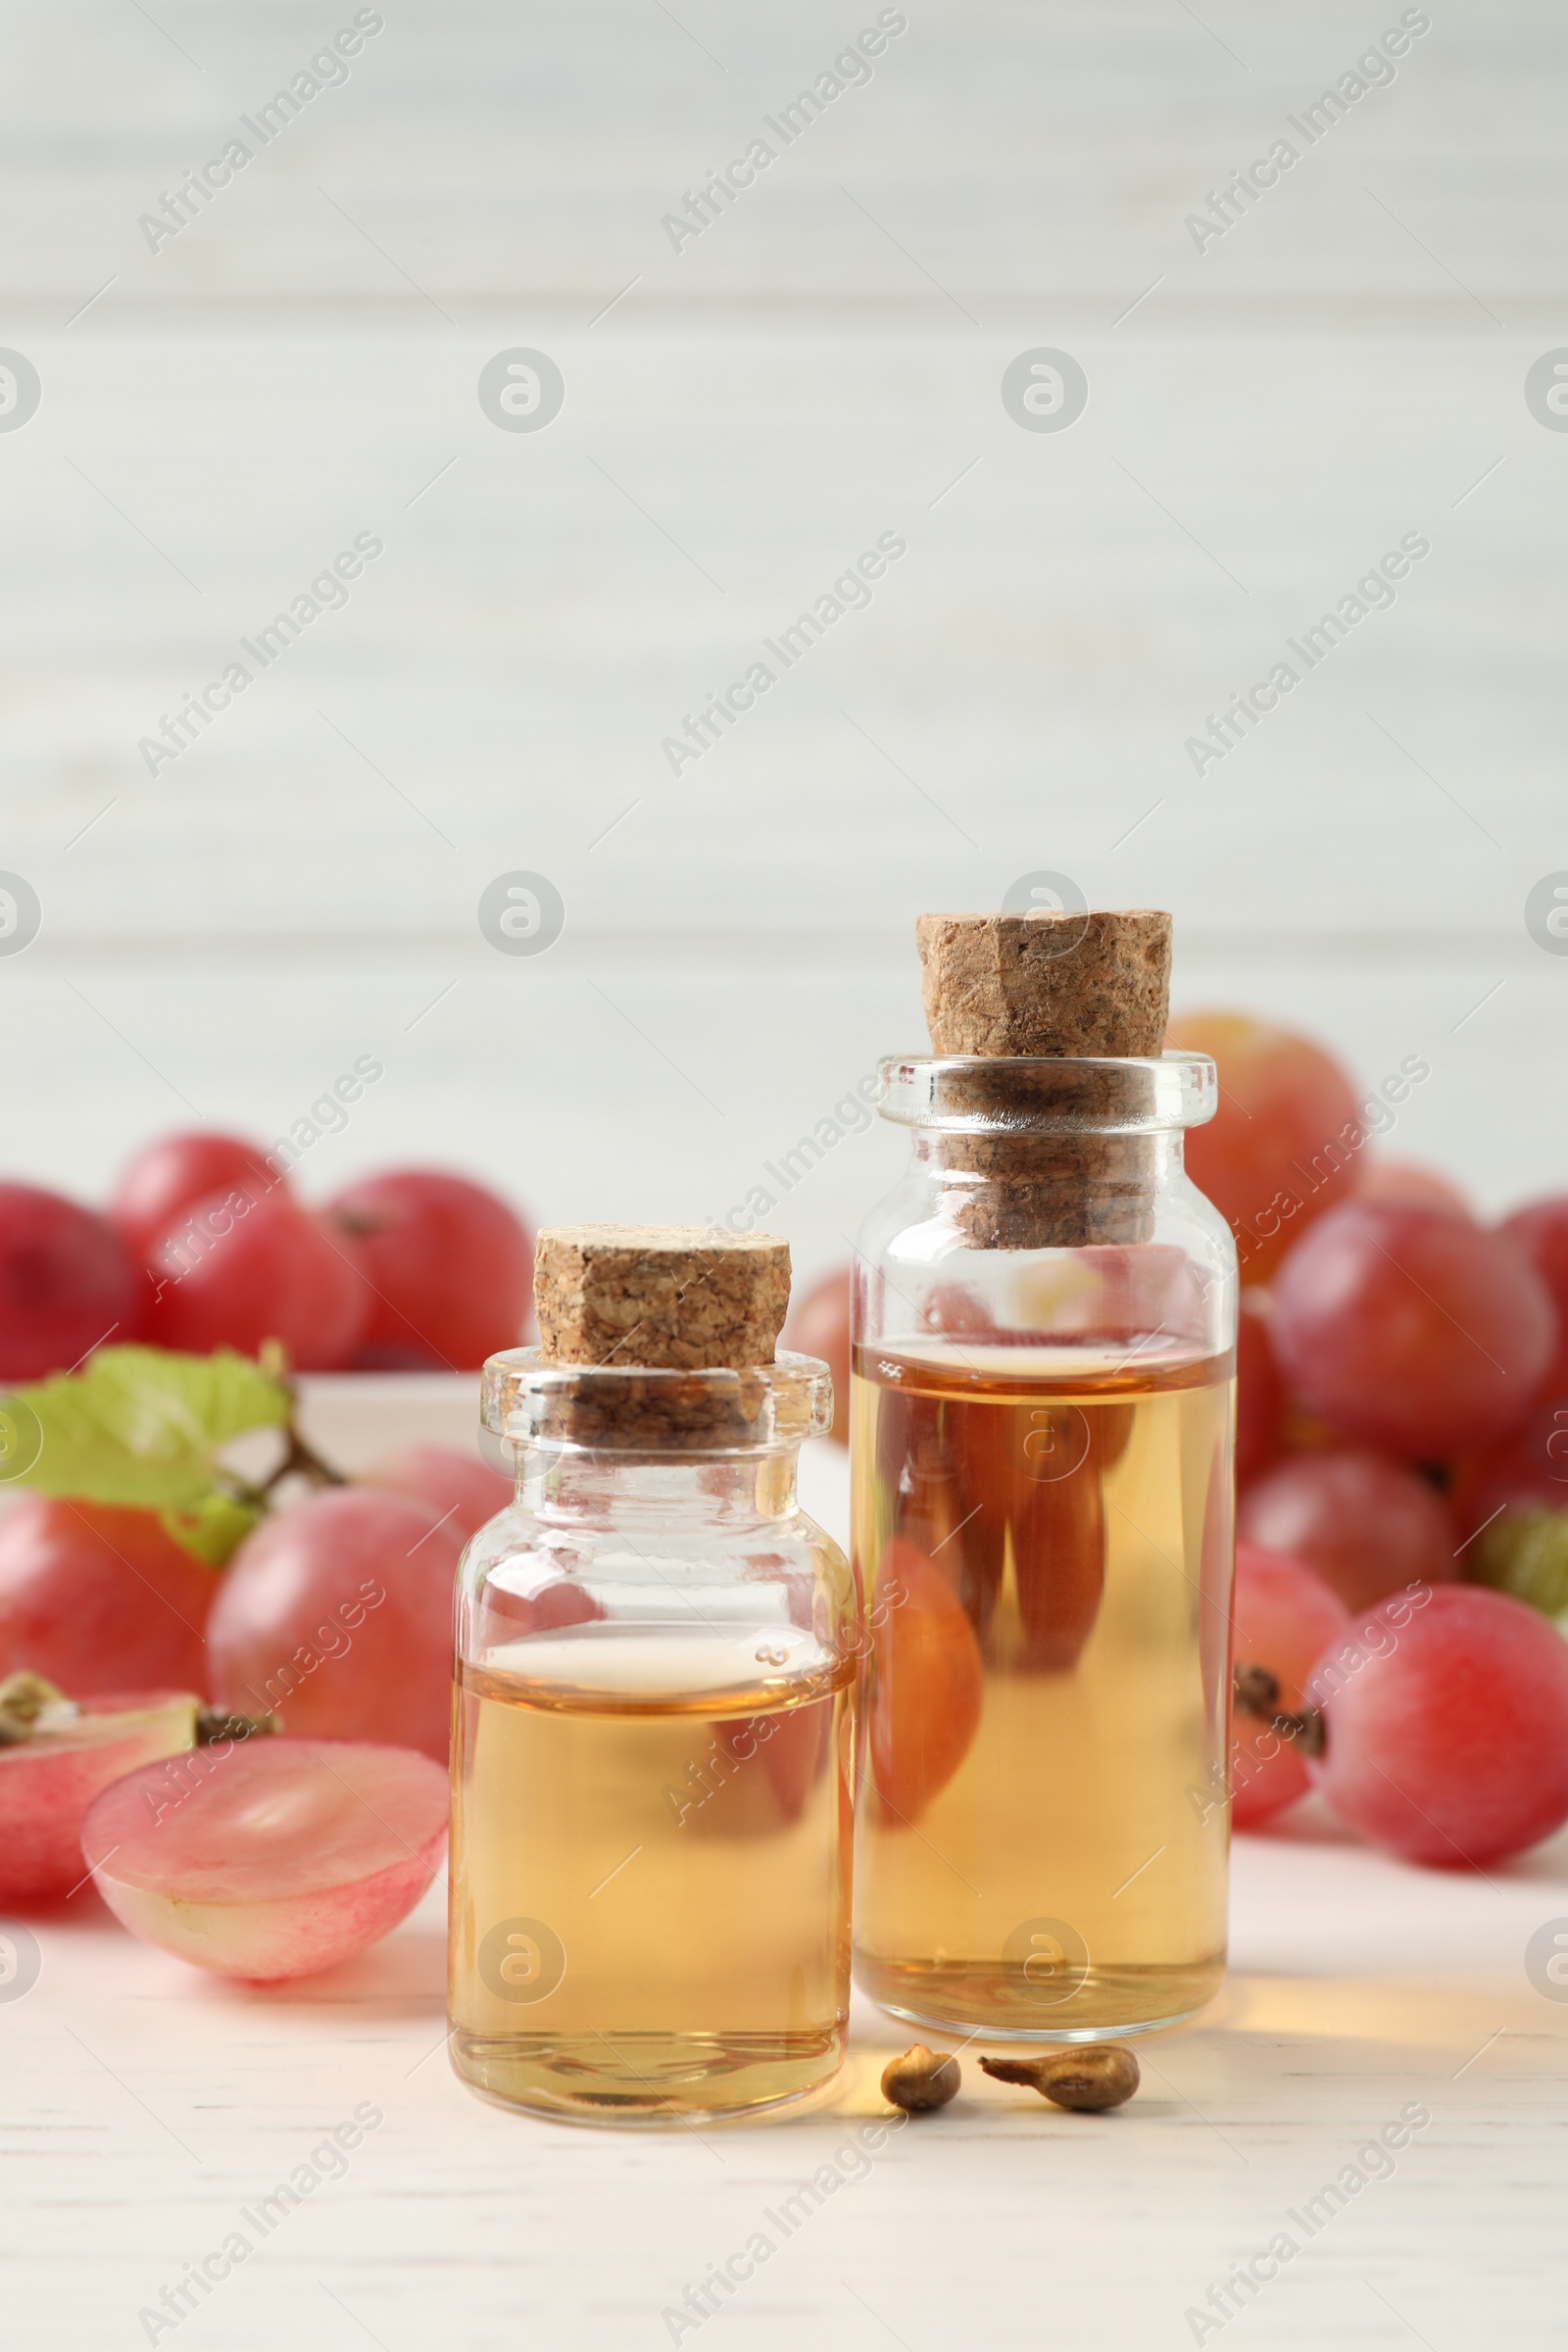 Photo of Organic red grapes, seeds and bottles of natural essential oil on white wooden table